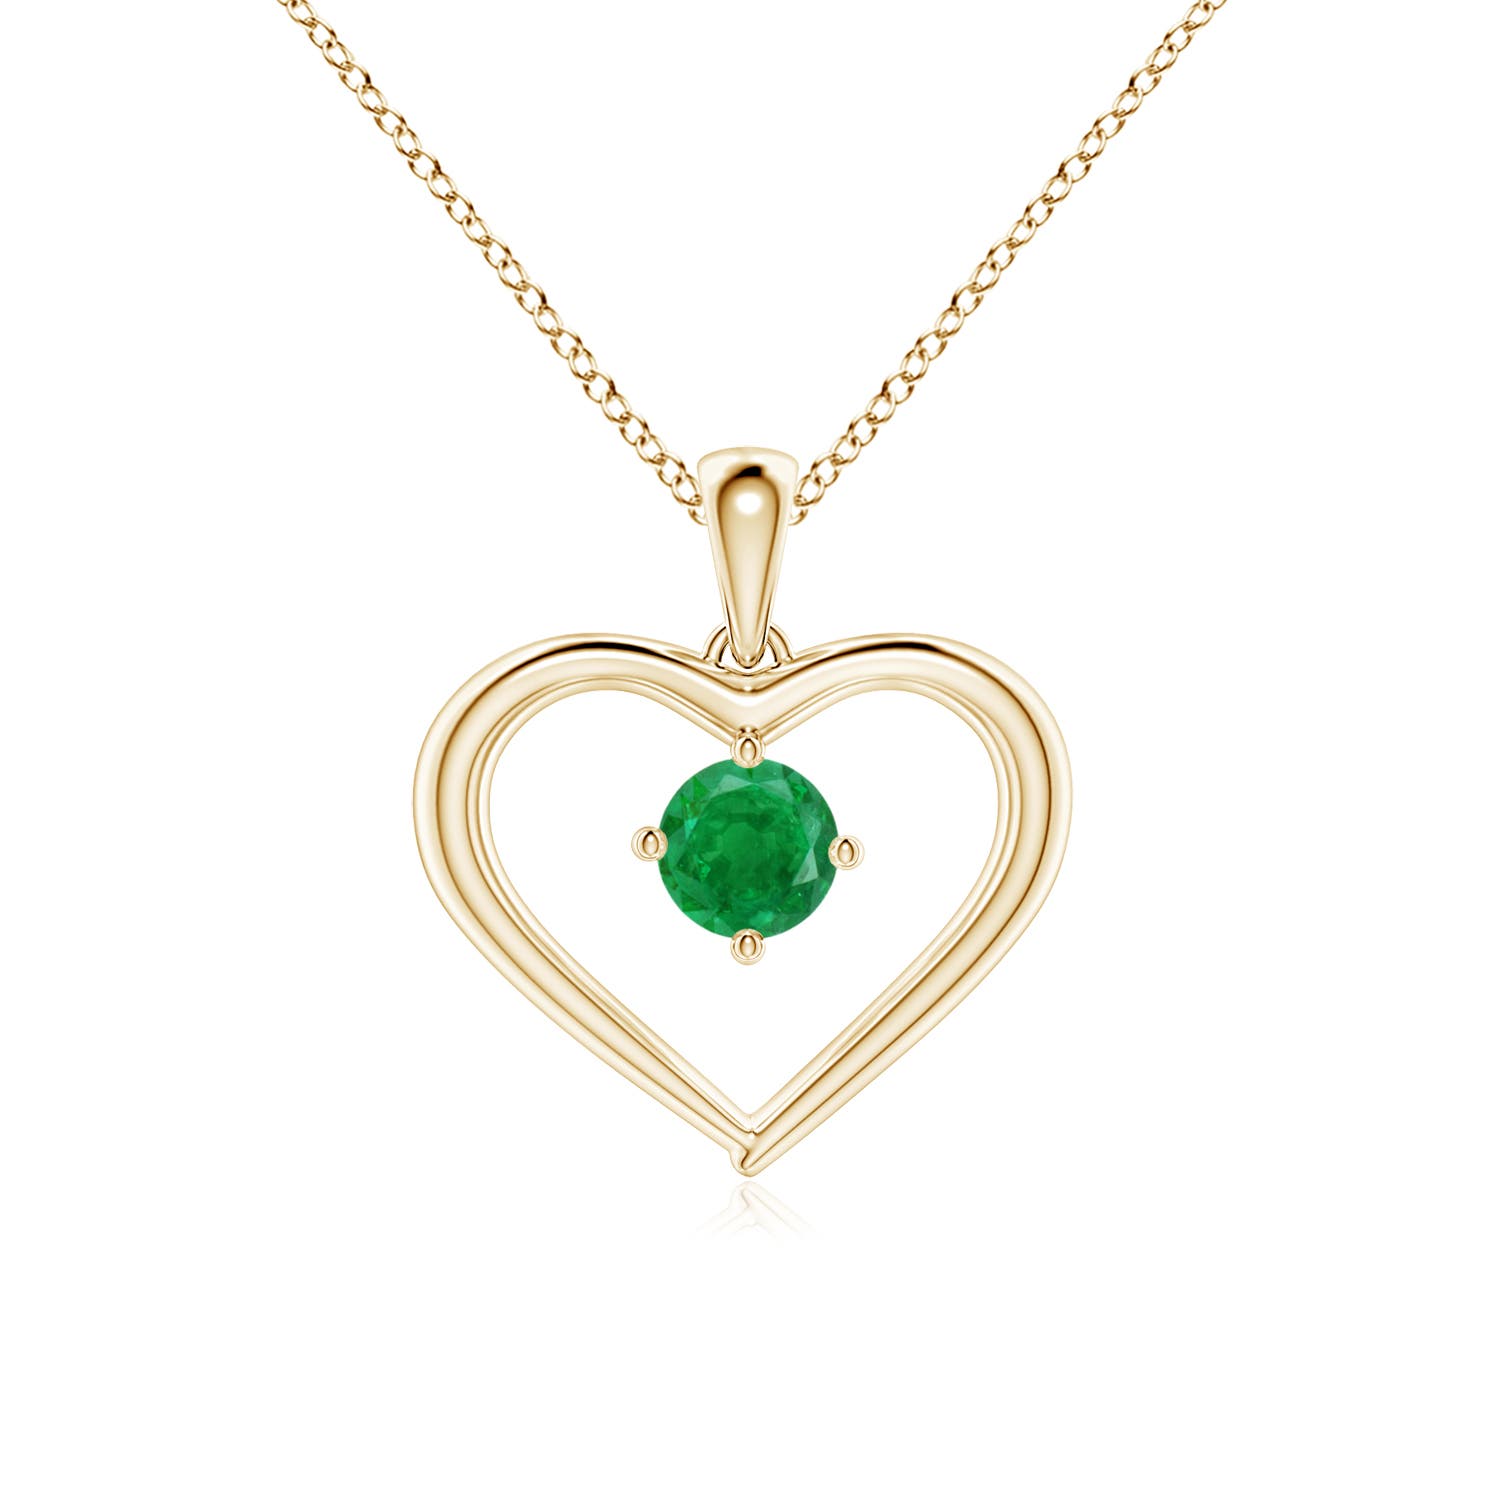 AA - Emerald / 0.24 CT / 14 KT Yellow Gold